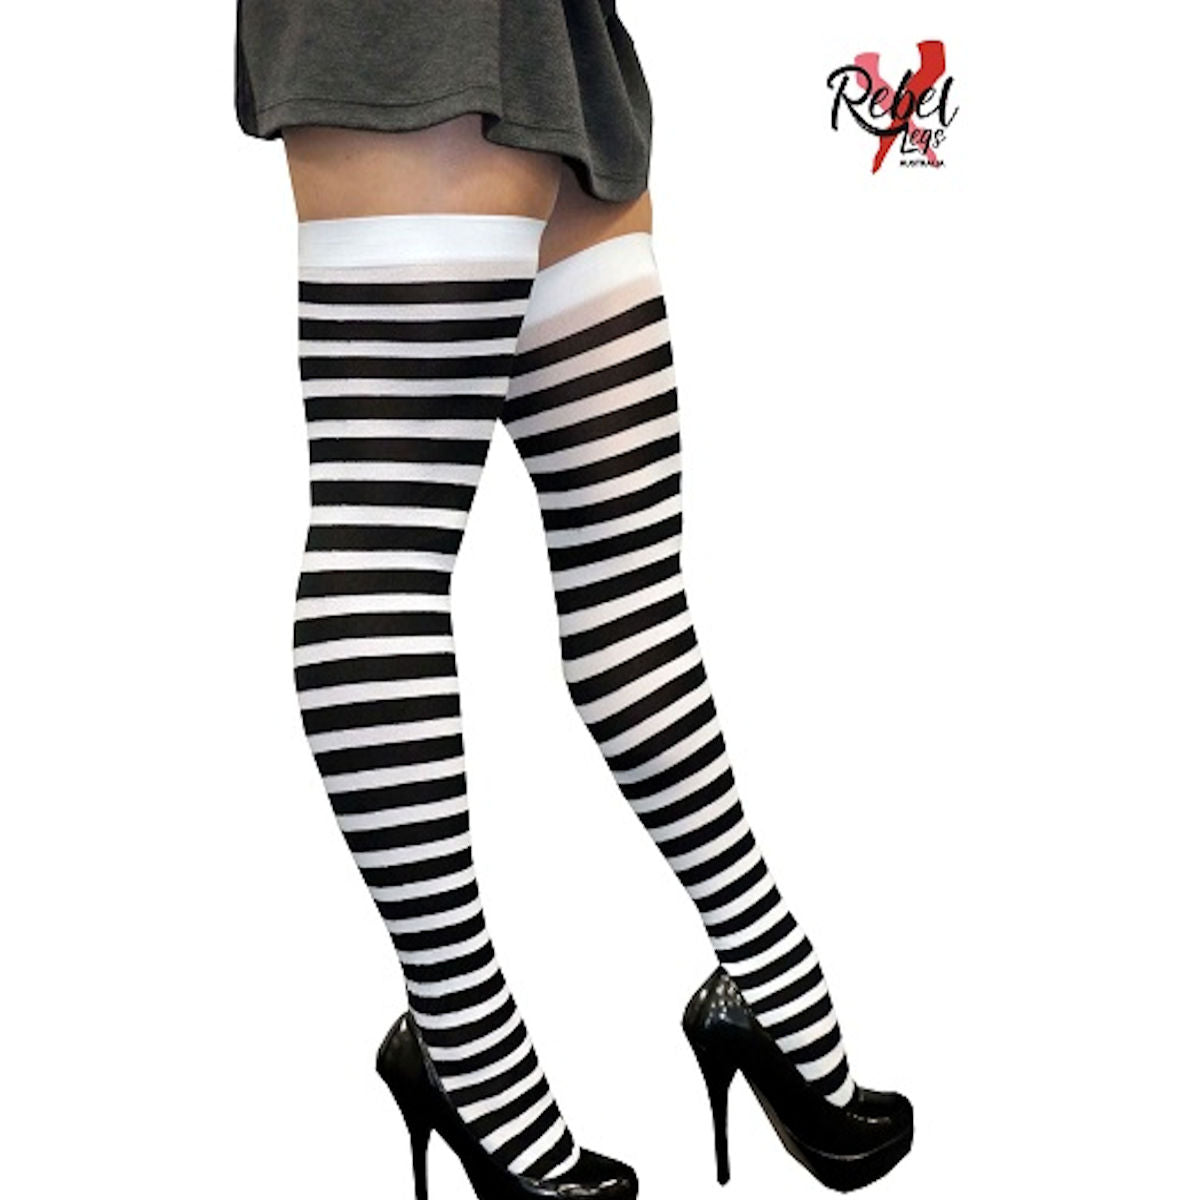 Thigh High Stockings Black & White Stripes Costume Accessory Adult Costume